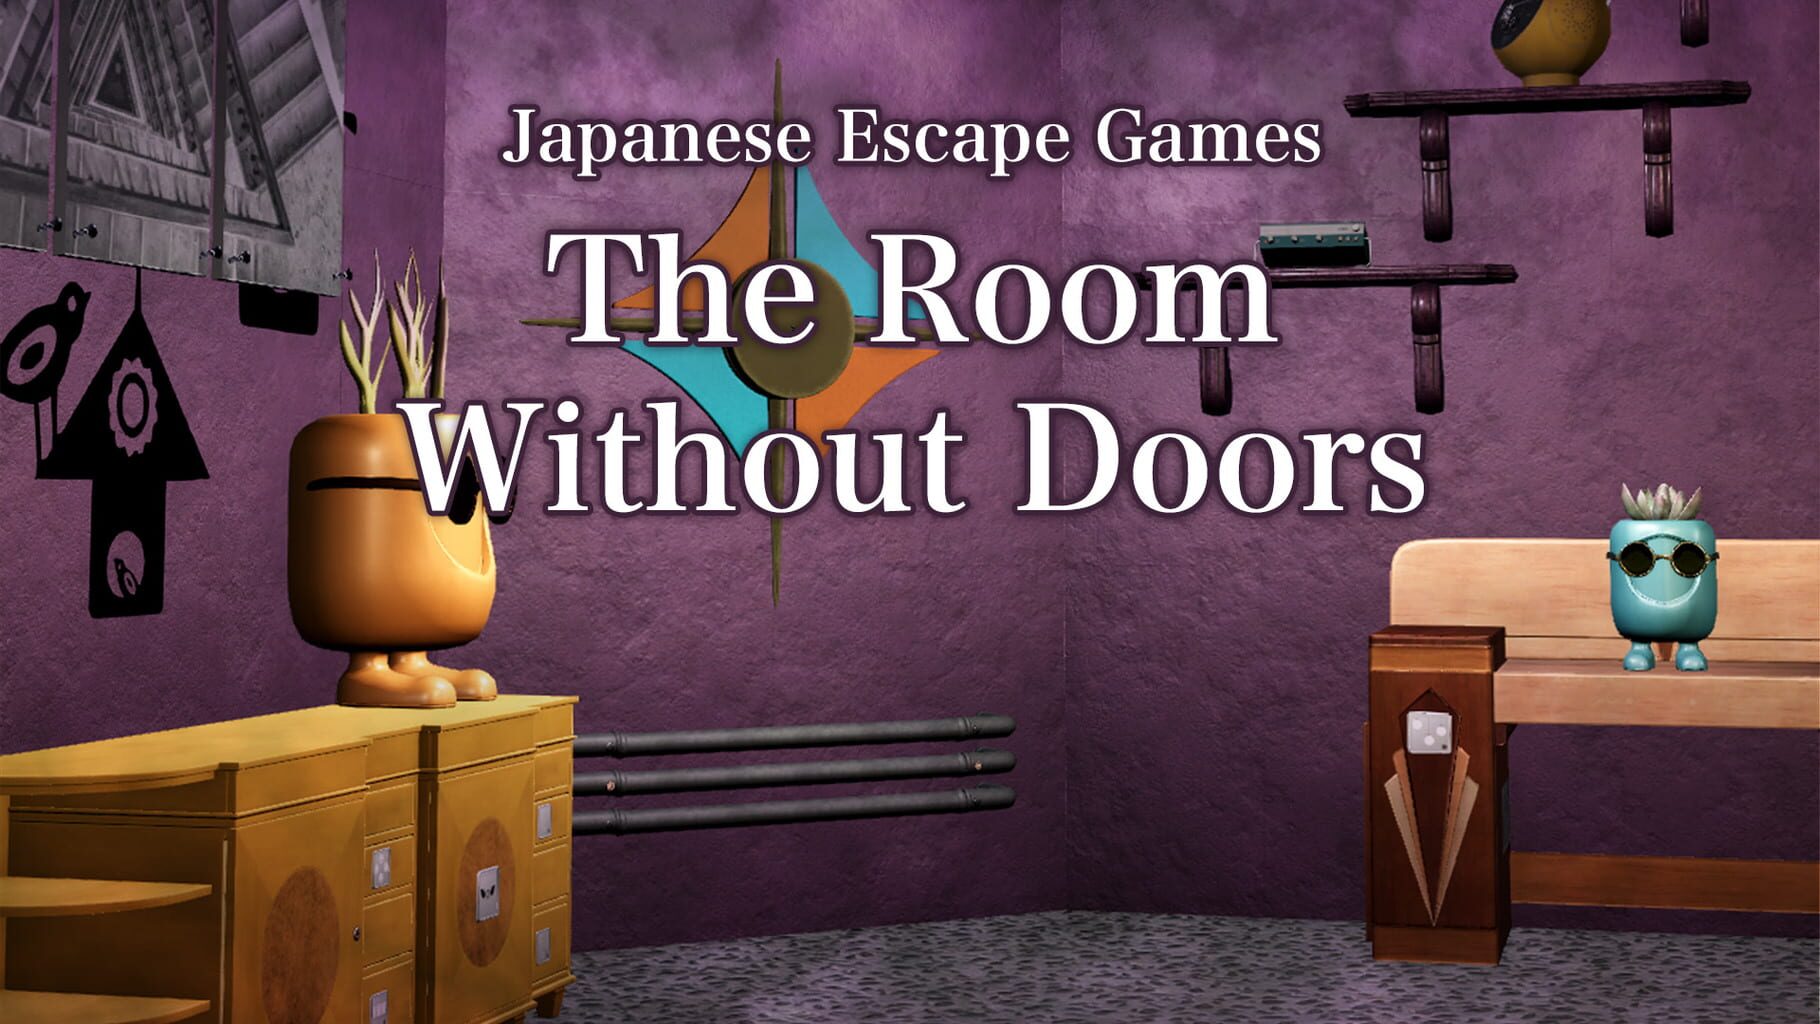 Japanese Escape Games: The Room Without Doors artwork